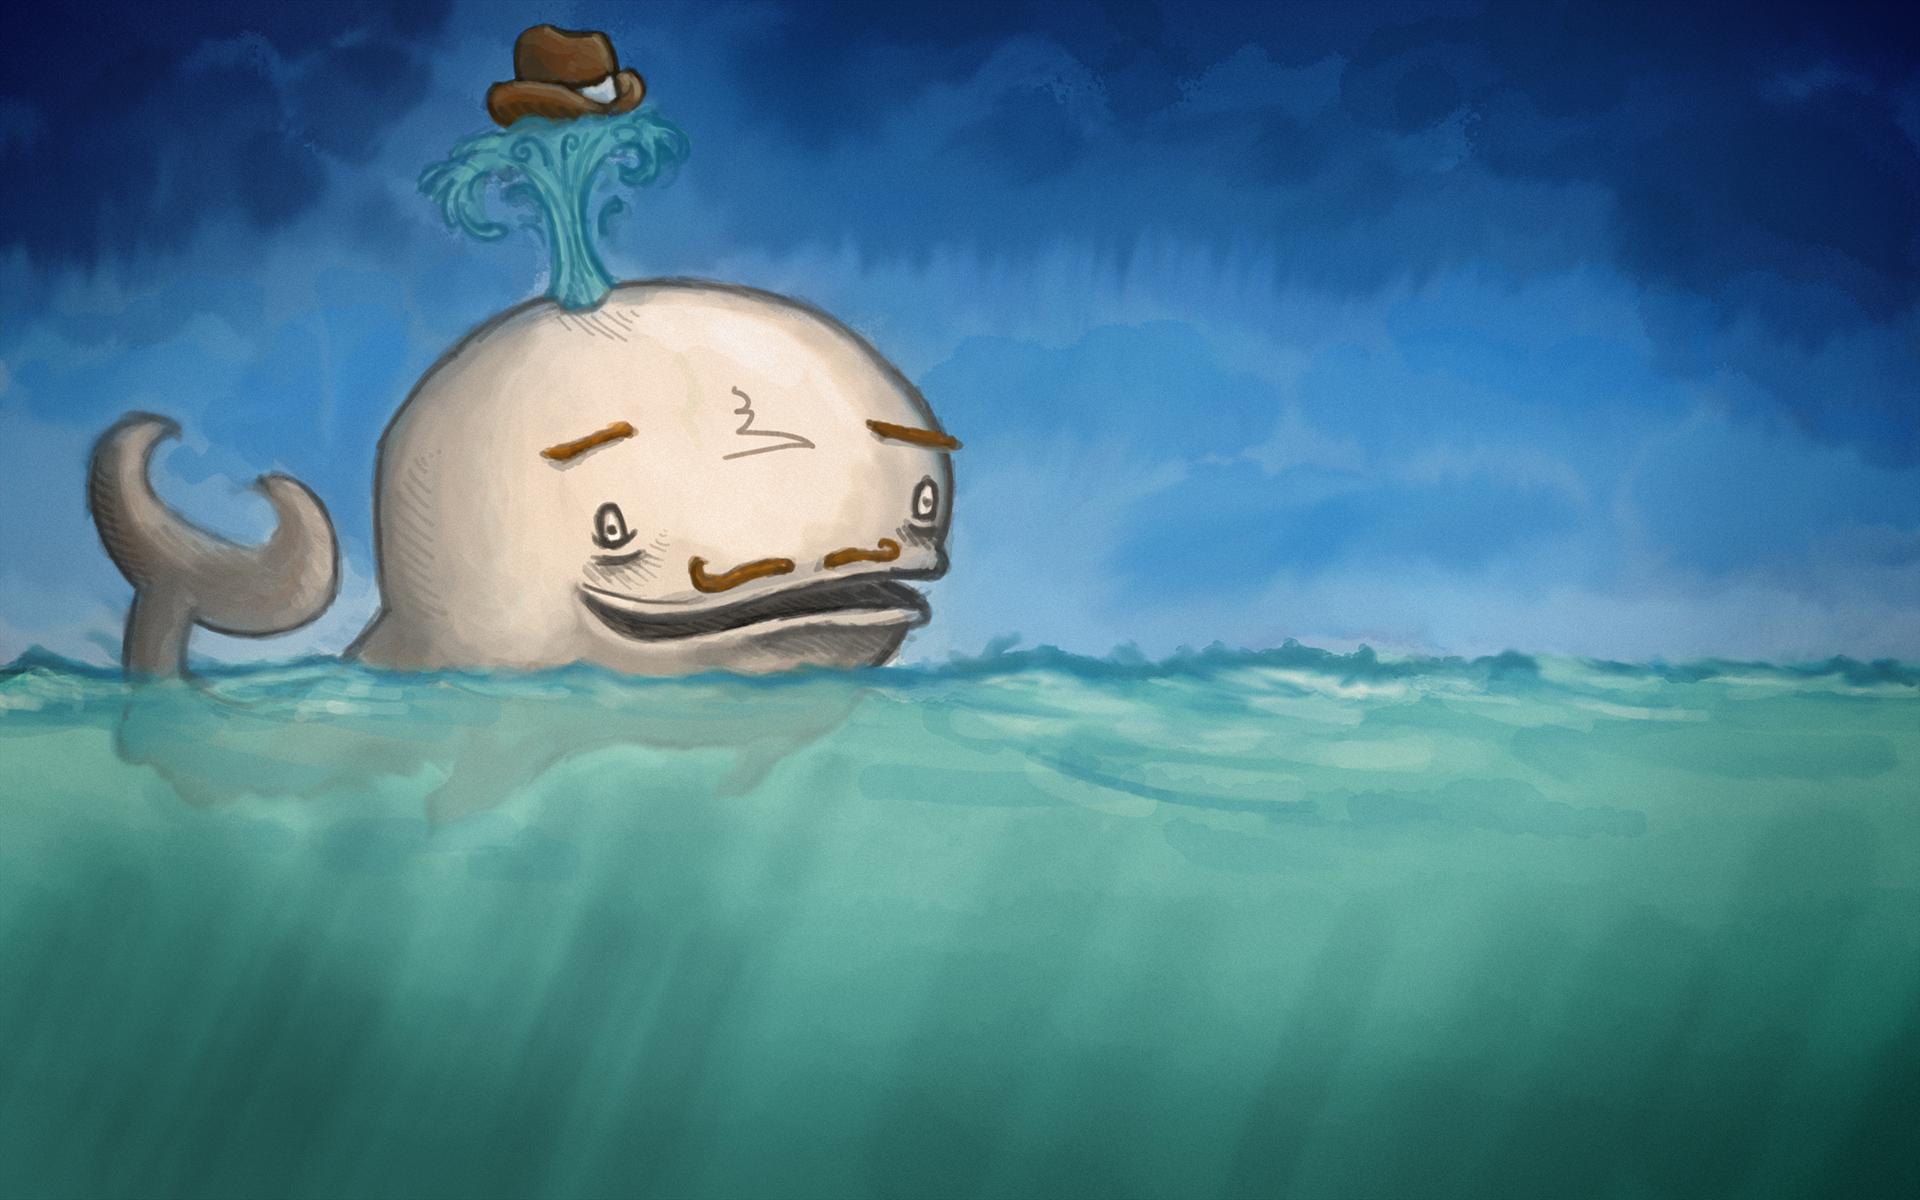 water, Animals, Fail, Funny, Whales, Moustache, Artwork, Drawings, Hats, Anthropomorphism, Sea Wallpaper